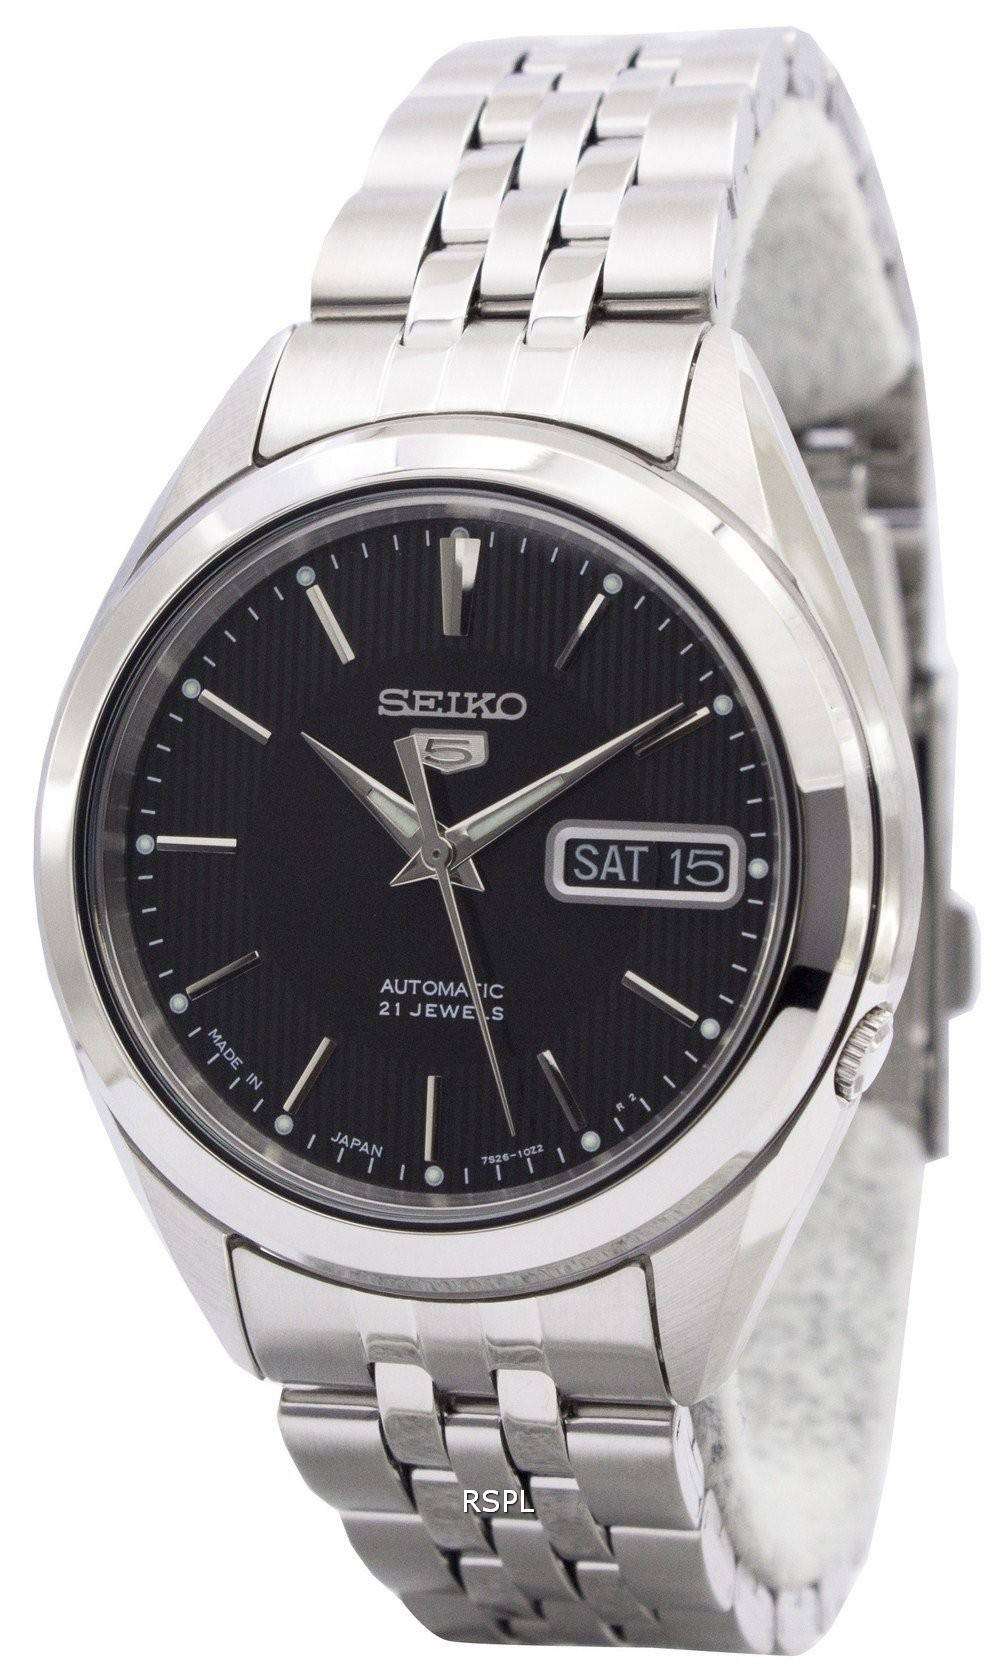 Seiko 5 Automatic 21 Jewels Japan Made SNKL23J1 SNKL23J Men's Watch -  CityWatches IN